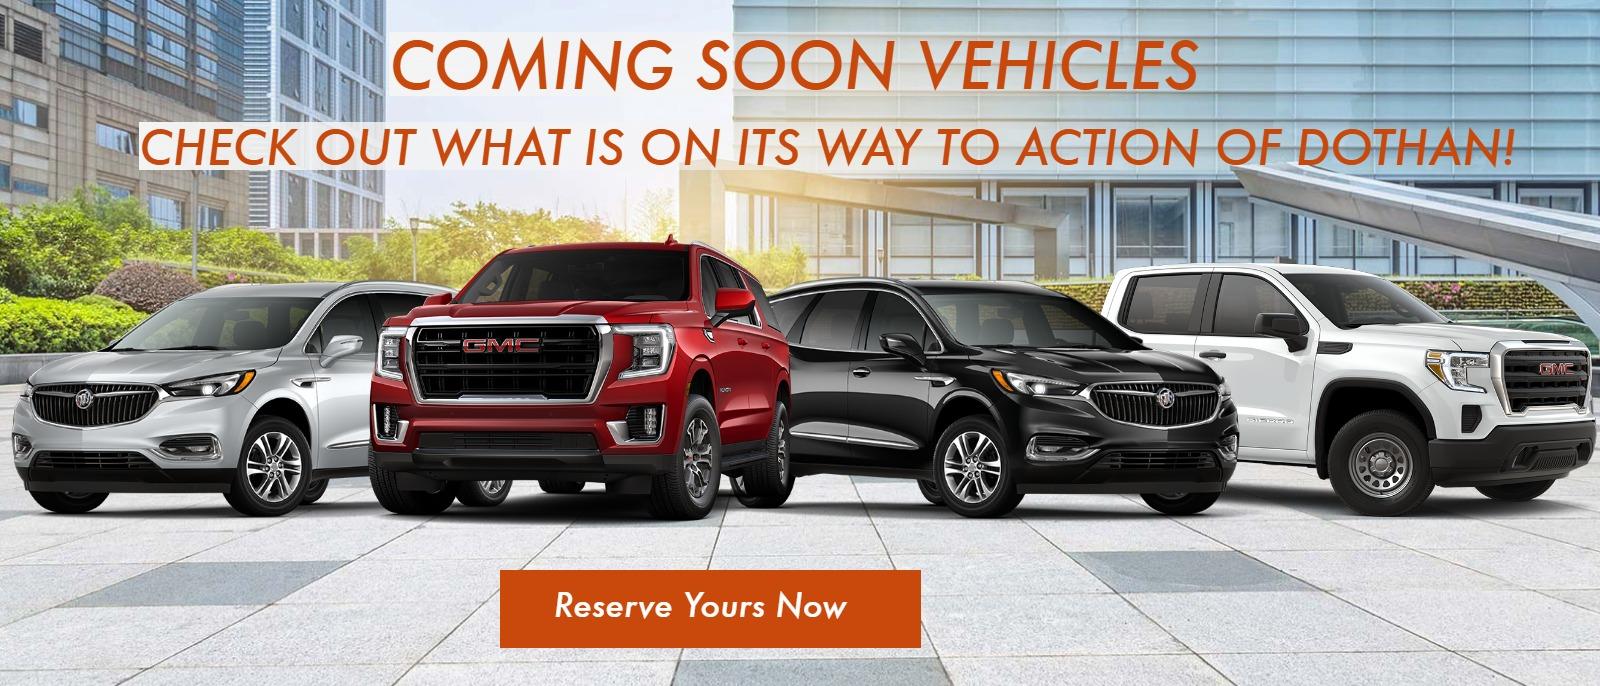 COMING SOON VEHICLES
Check out what is on its way to Action of Dothan!

Reserve Yours Now